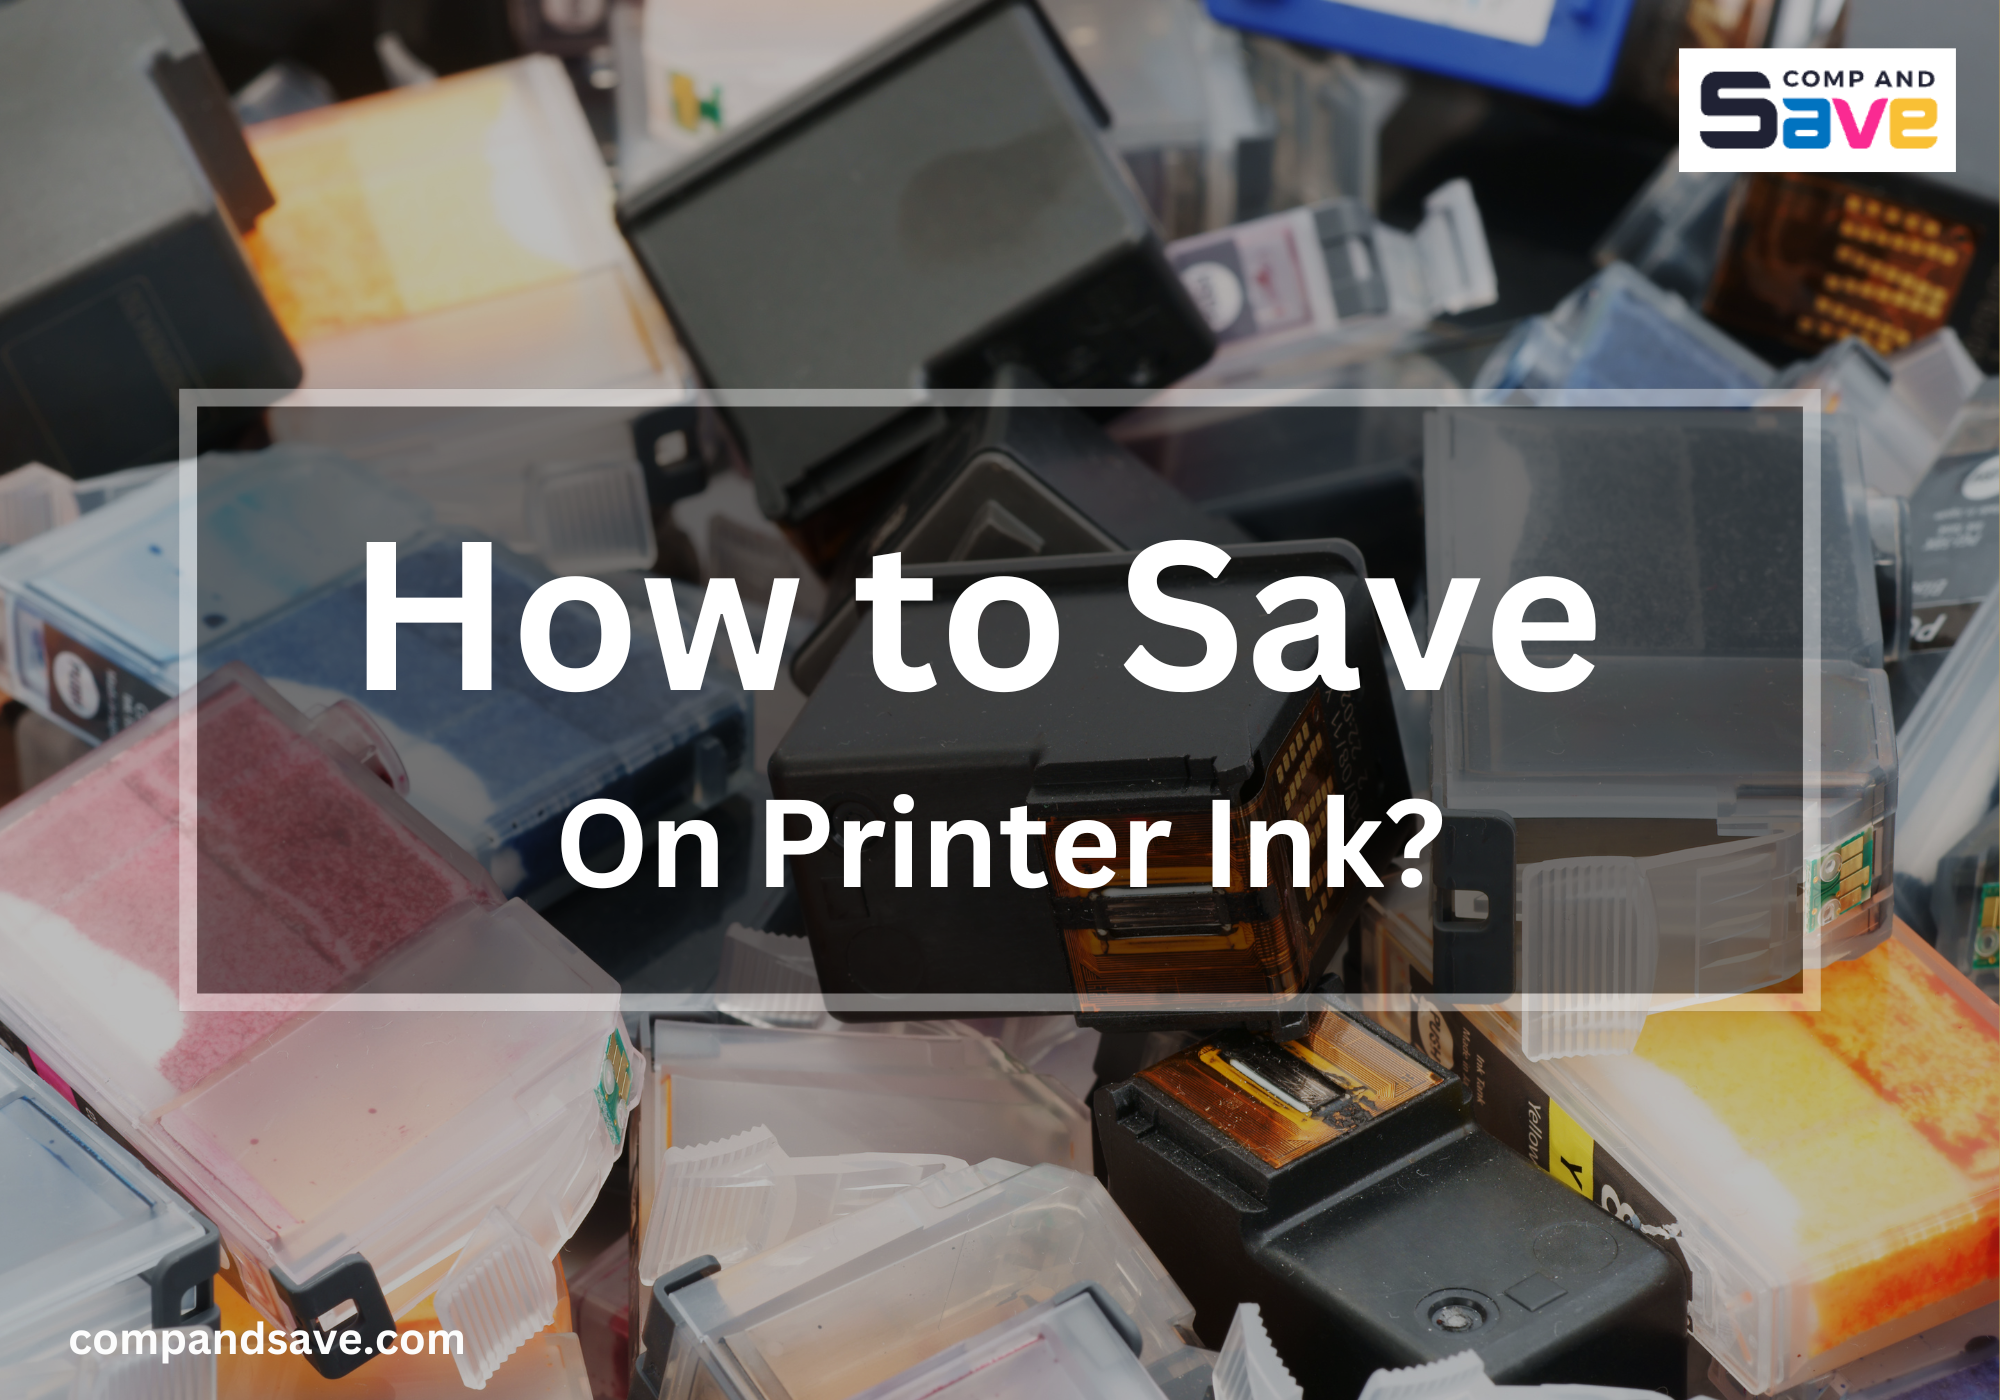 image from How to Save On Printer Ink: Save More With CompAndSave